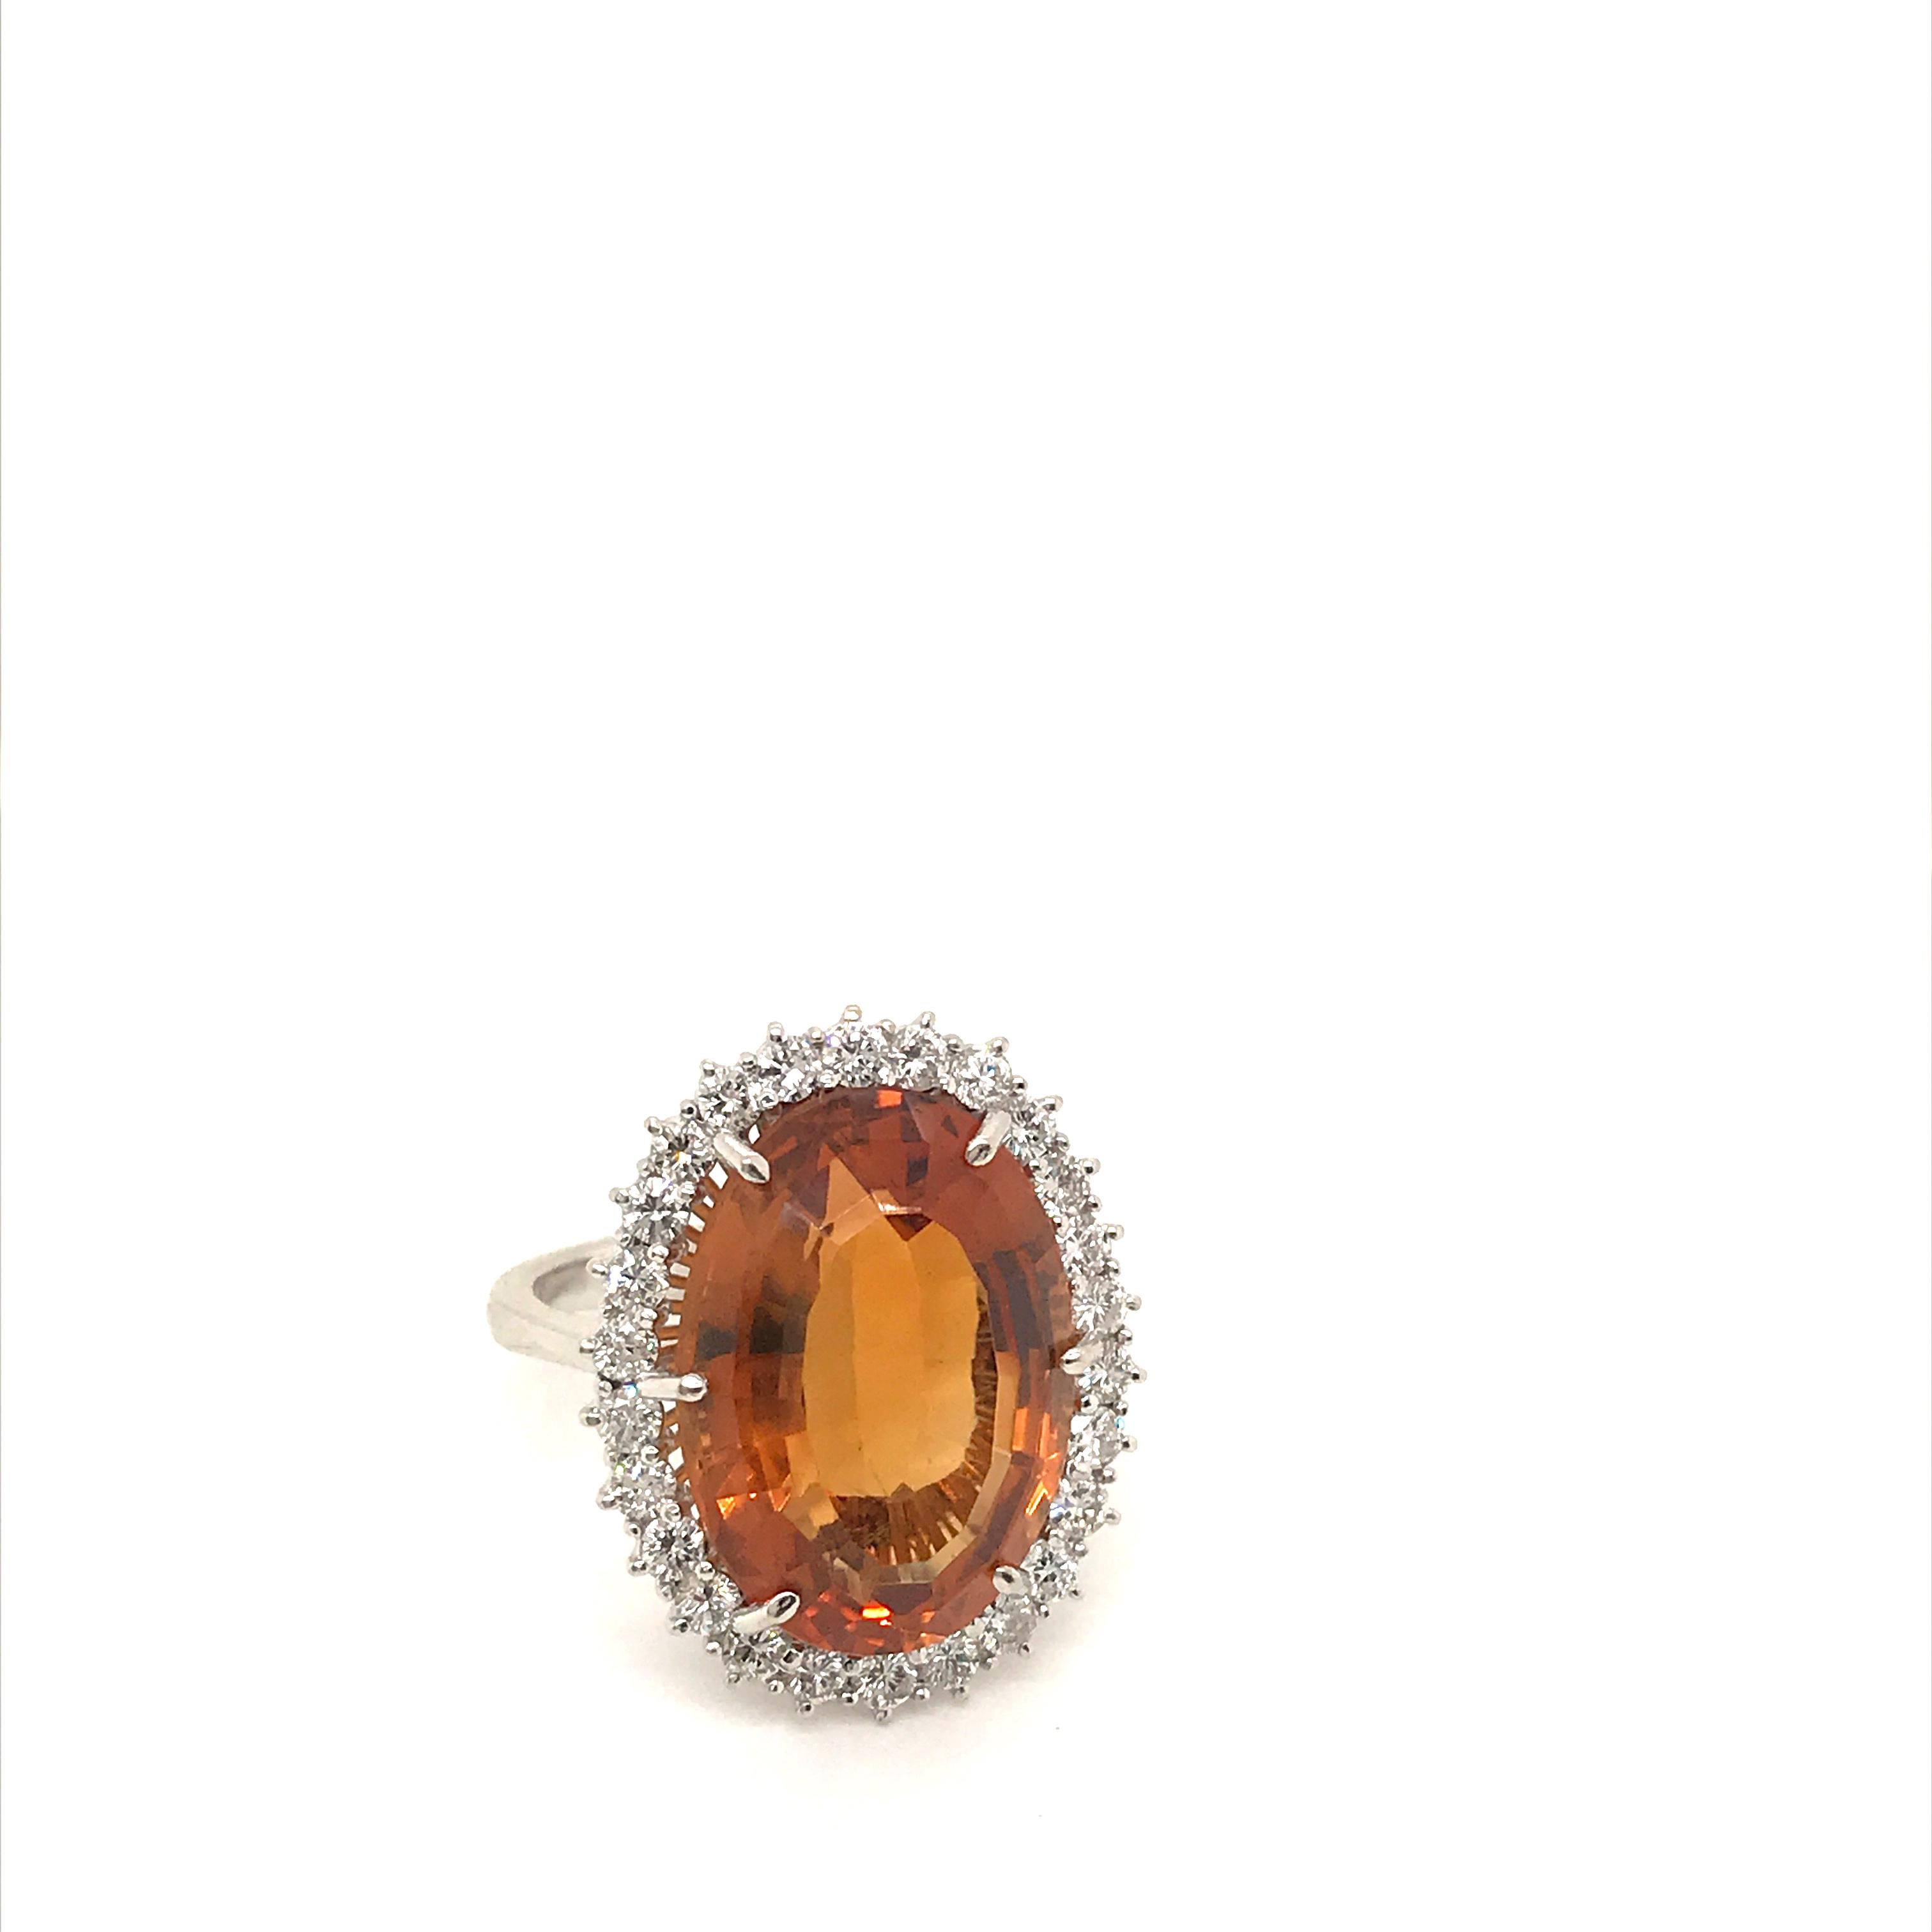 Stunning Cluster ring set in the center with a beautiful quartz citrine weighing approx 12 carats, and surrounded by approx. 1.10 carat of diamonds. Circa 1970

CONDITION: Pre-Owned - Excellent
METAL: 18k gold
GEM STONE: Quartz citrine 12 ct -